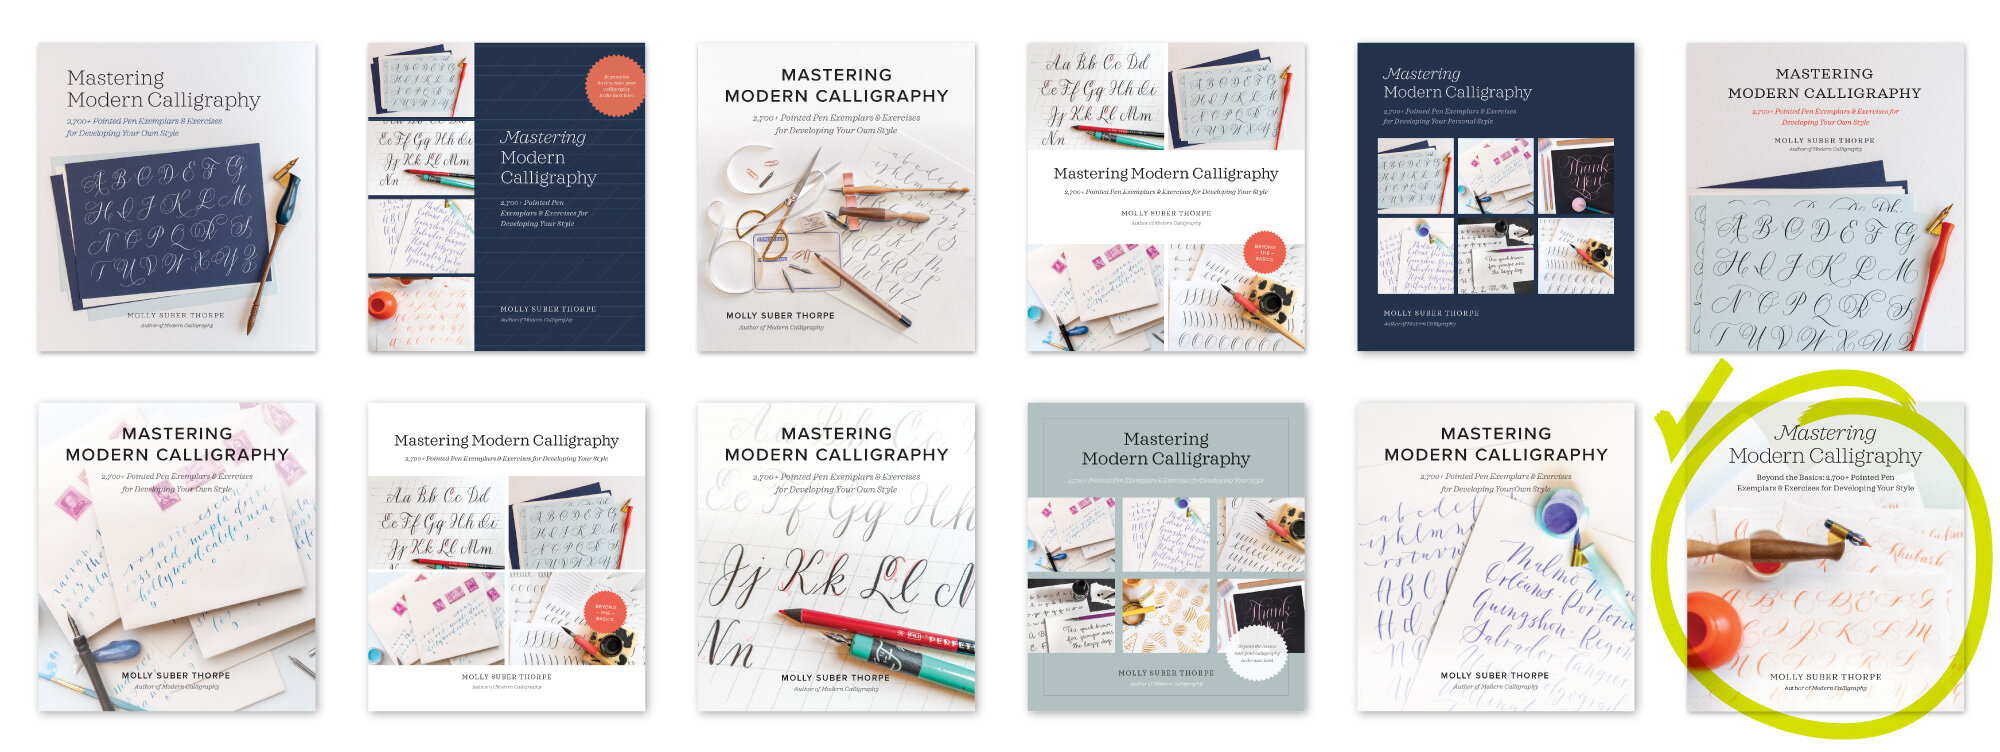 A Book Cover Story: The Design Process of Mastering Modern Calligraphy